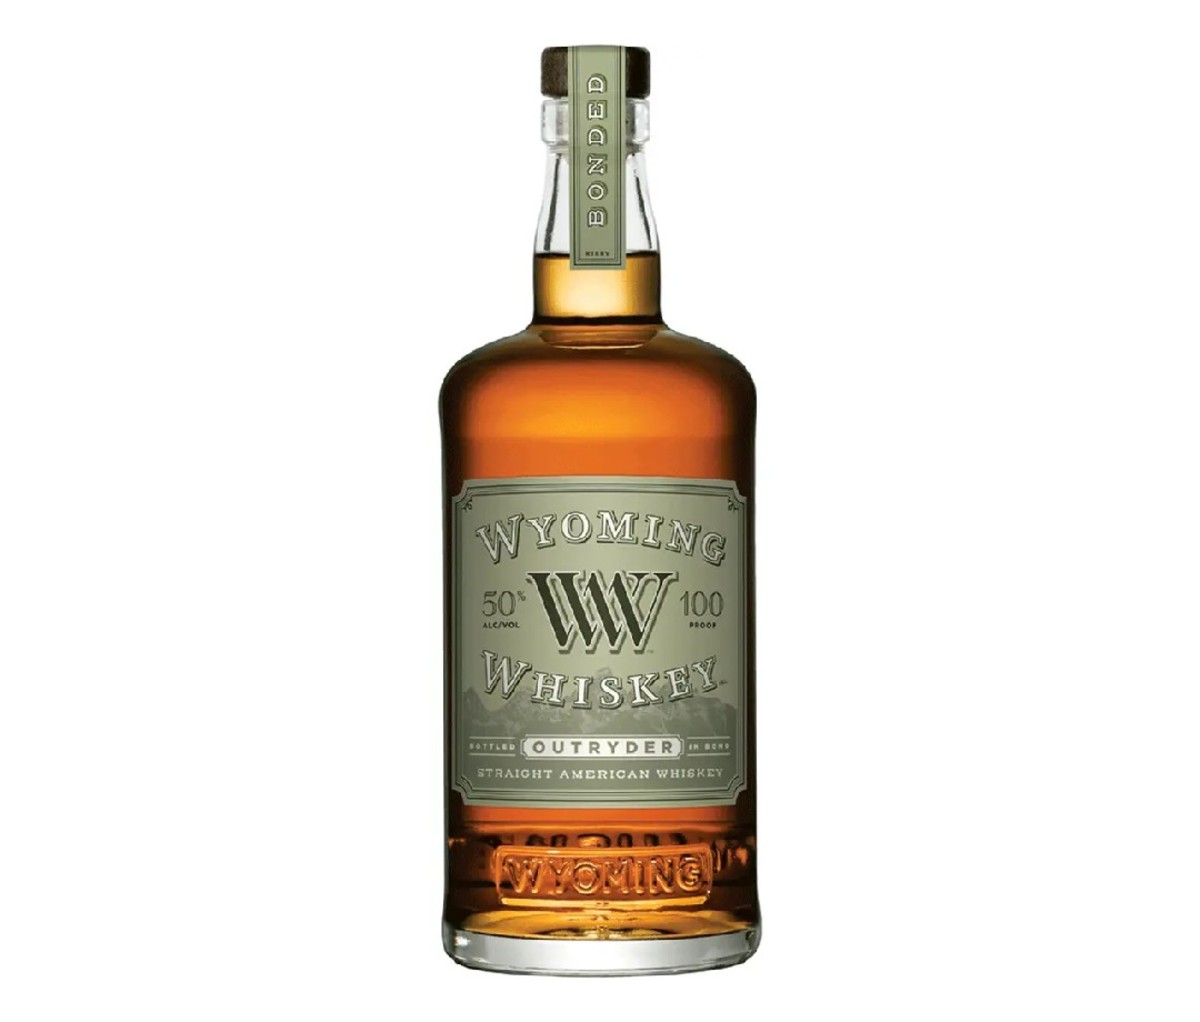 Bottle of Wyoming Whiskey Outryder